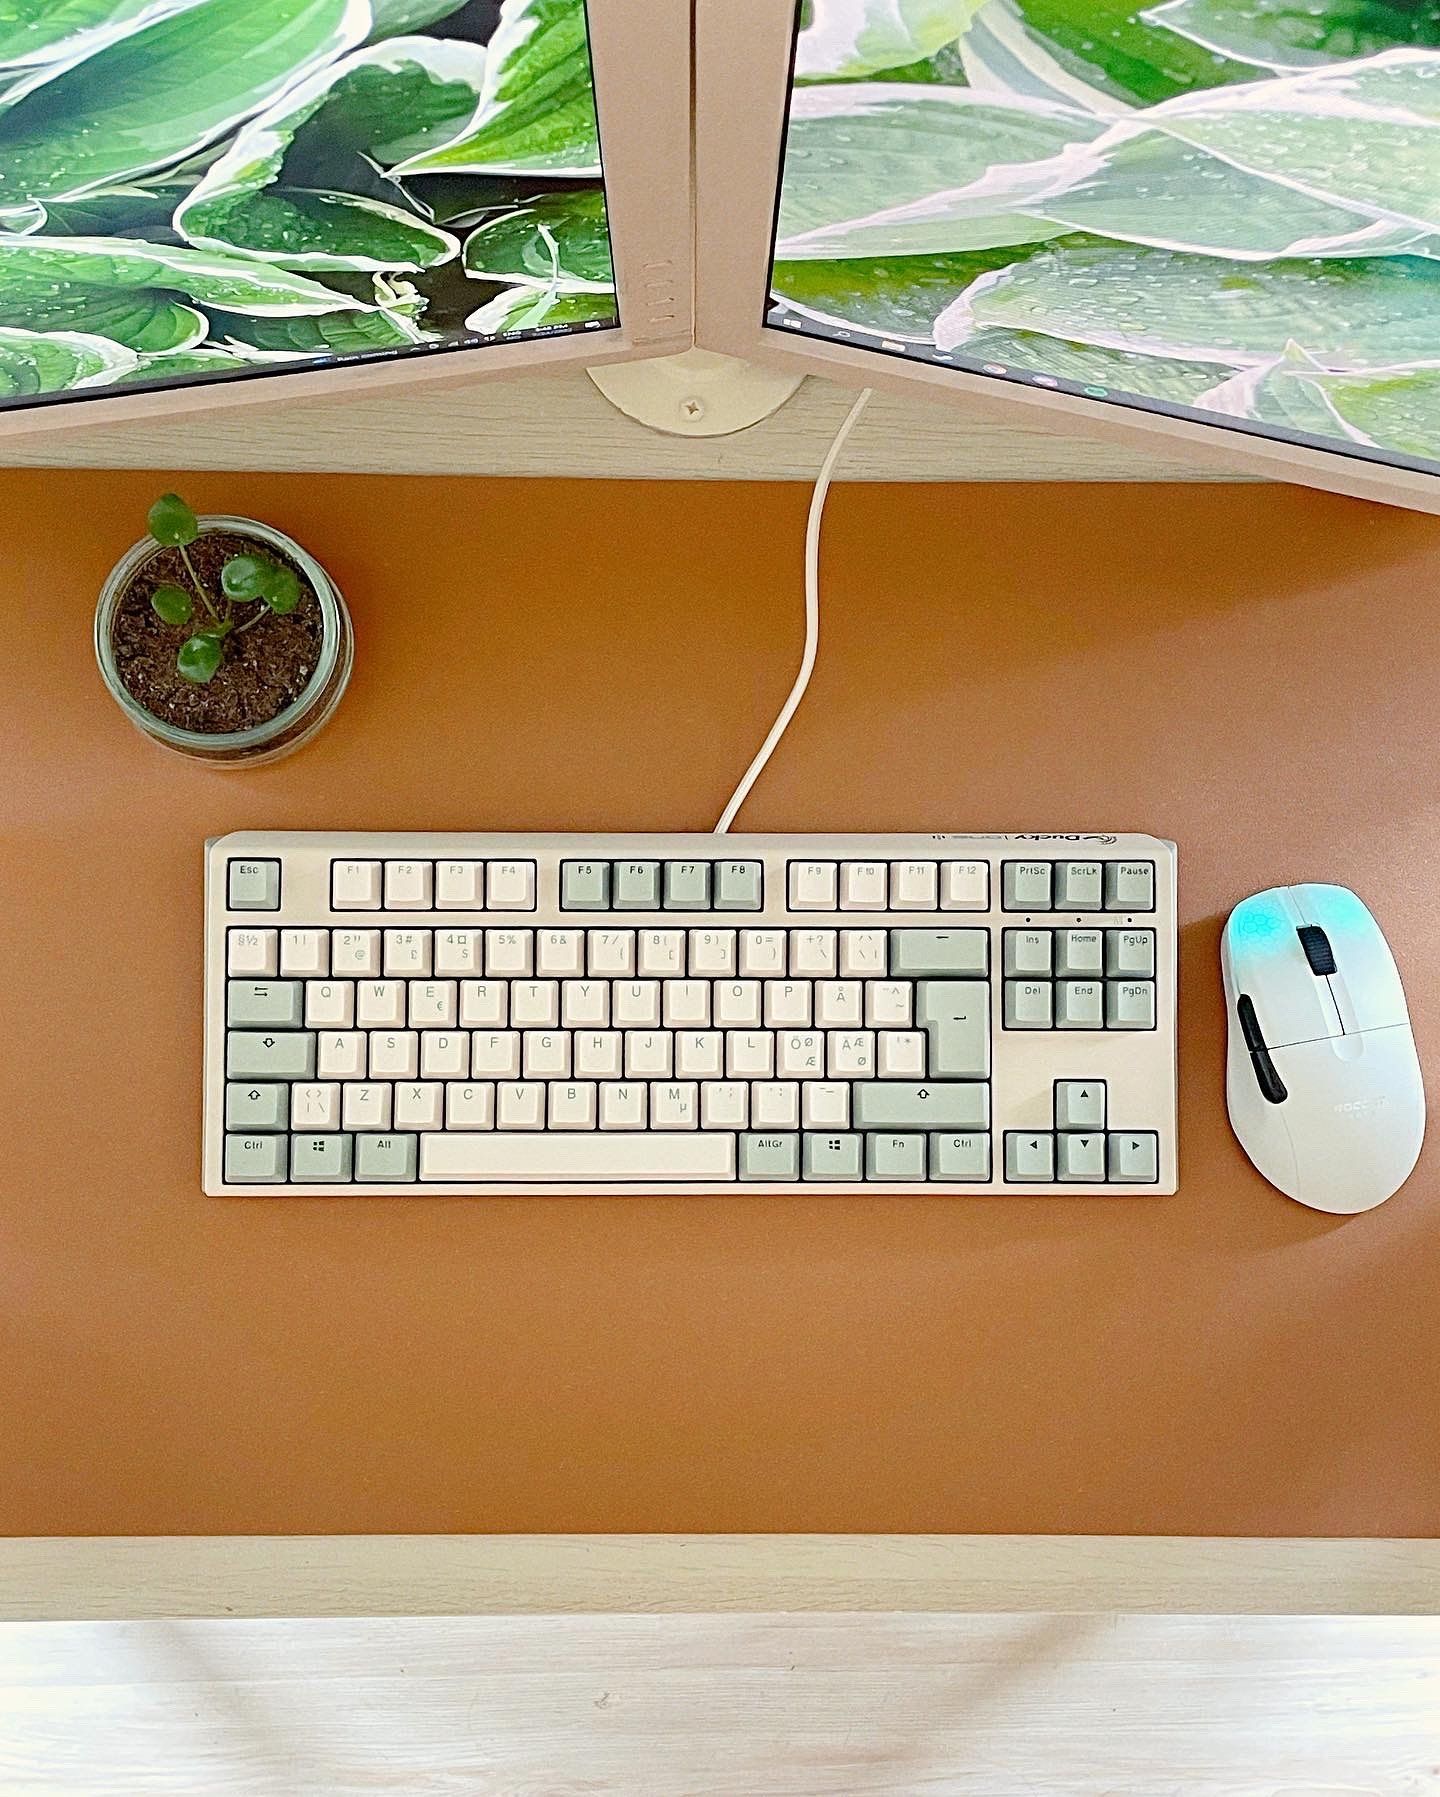 A Ducky One 3 mechanical keyboard and a ROCCAT Kone Pro Air ergonomic wireless gaming mouse